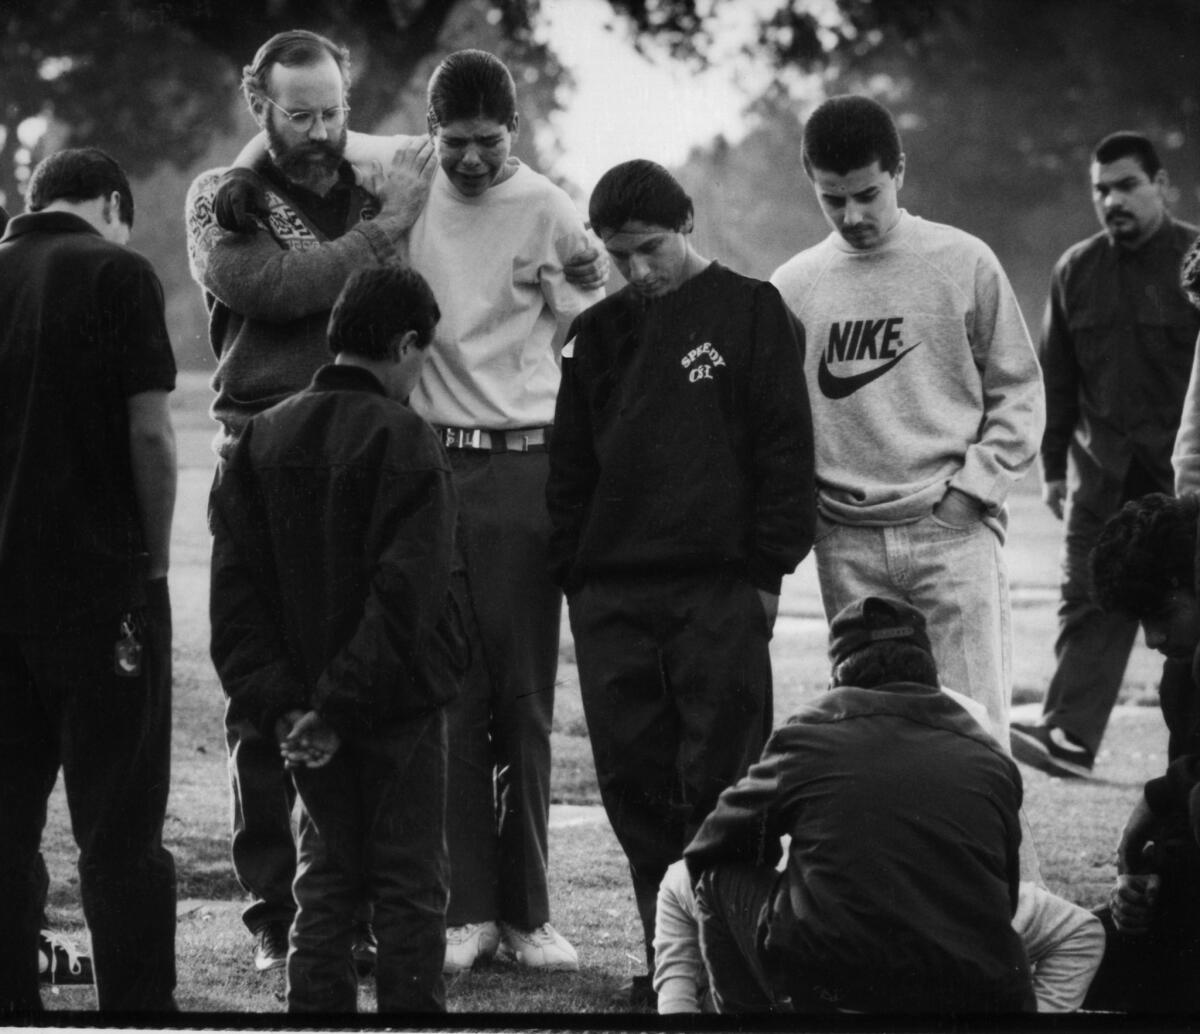 Father Gregory Boyle consoles gang members in February 1990 as they visit a grave. Boyle recently buried his 231st young person killed as a result of gang violence.